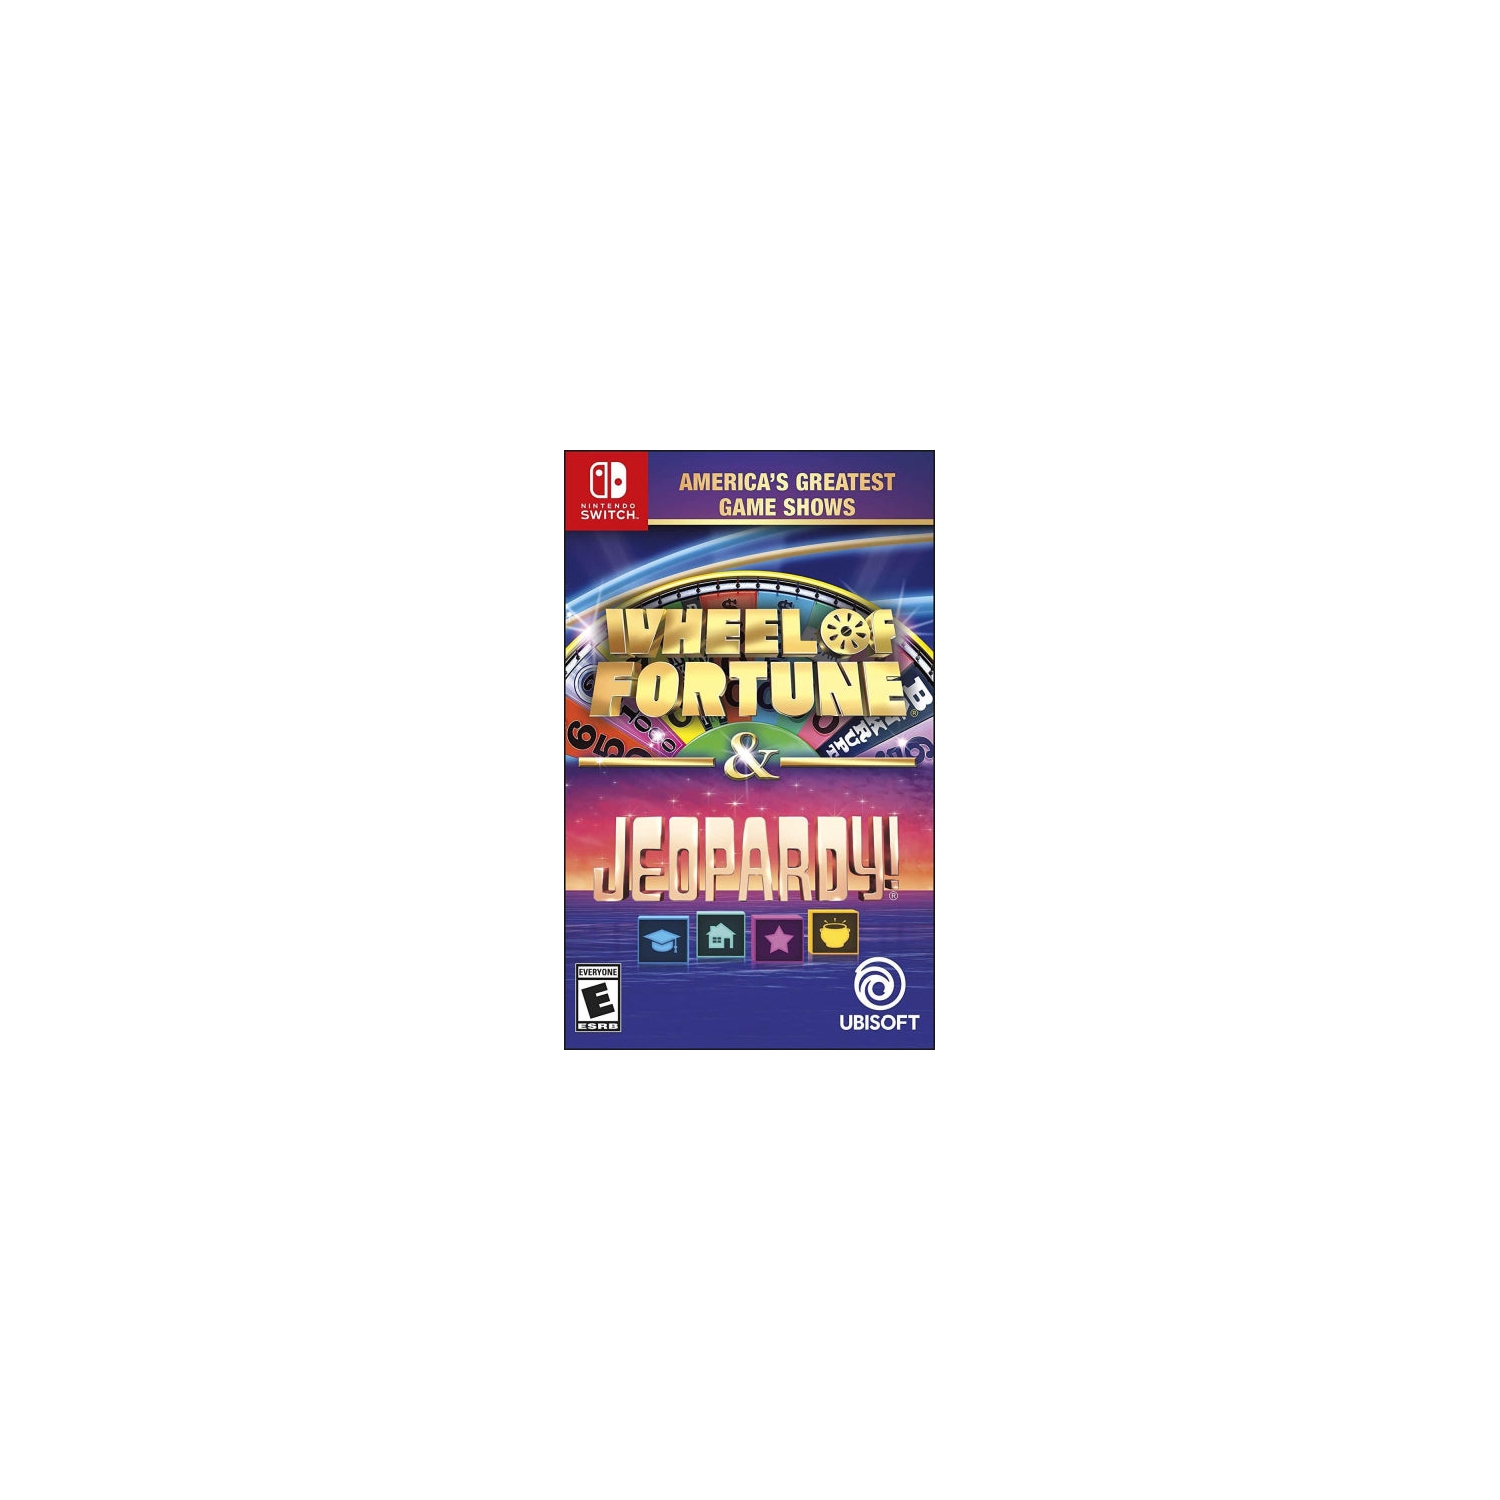 Americas Greatest Game Shows : Wheel of Fortune and Jeopardy! - NINTENDO SWITCH